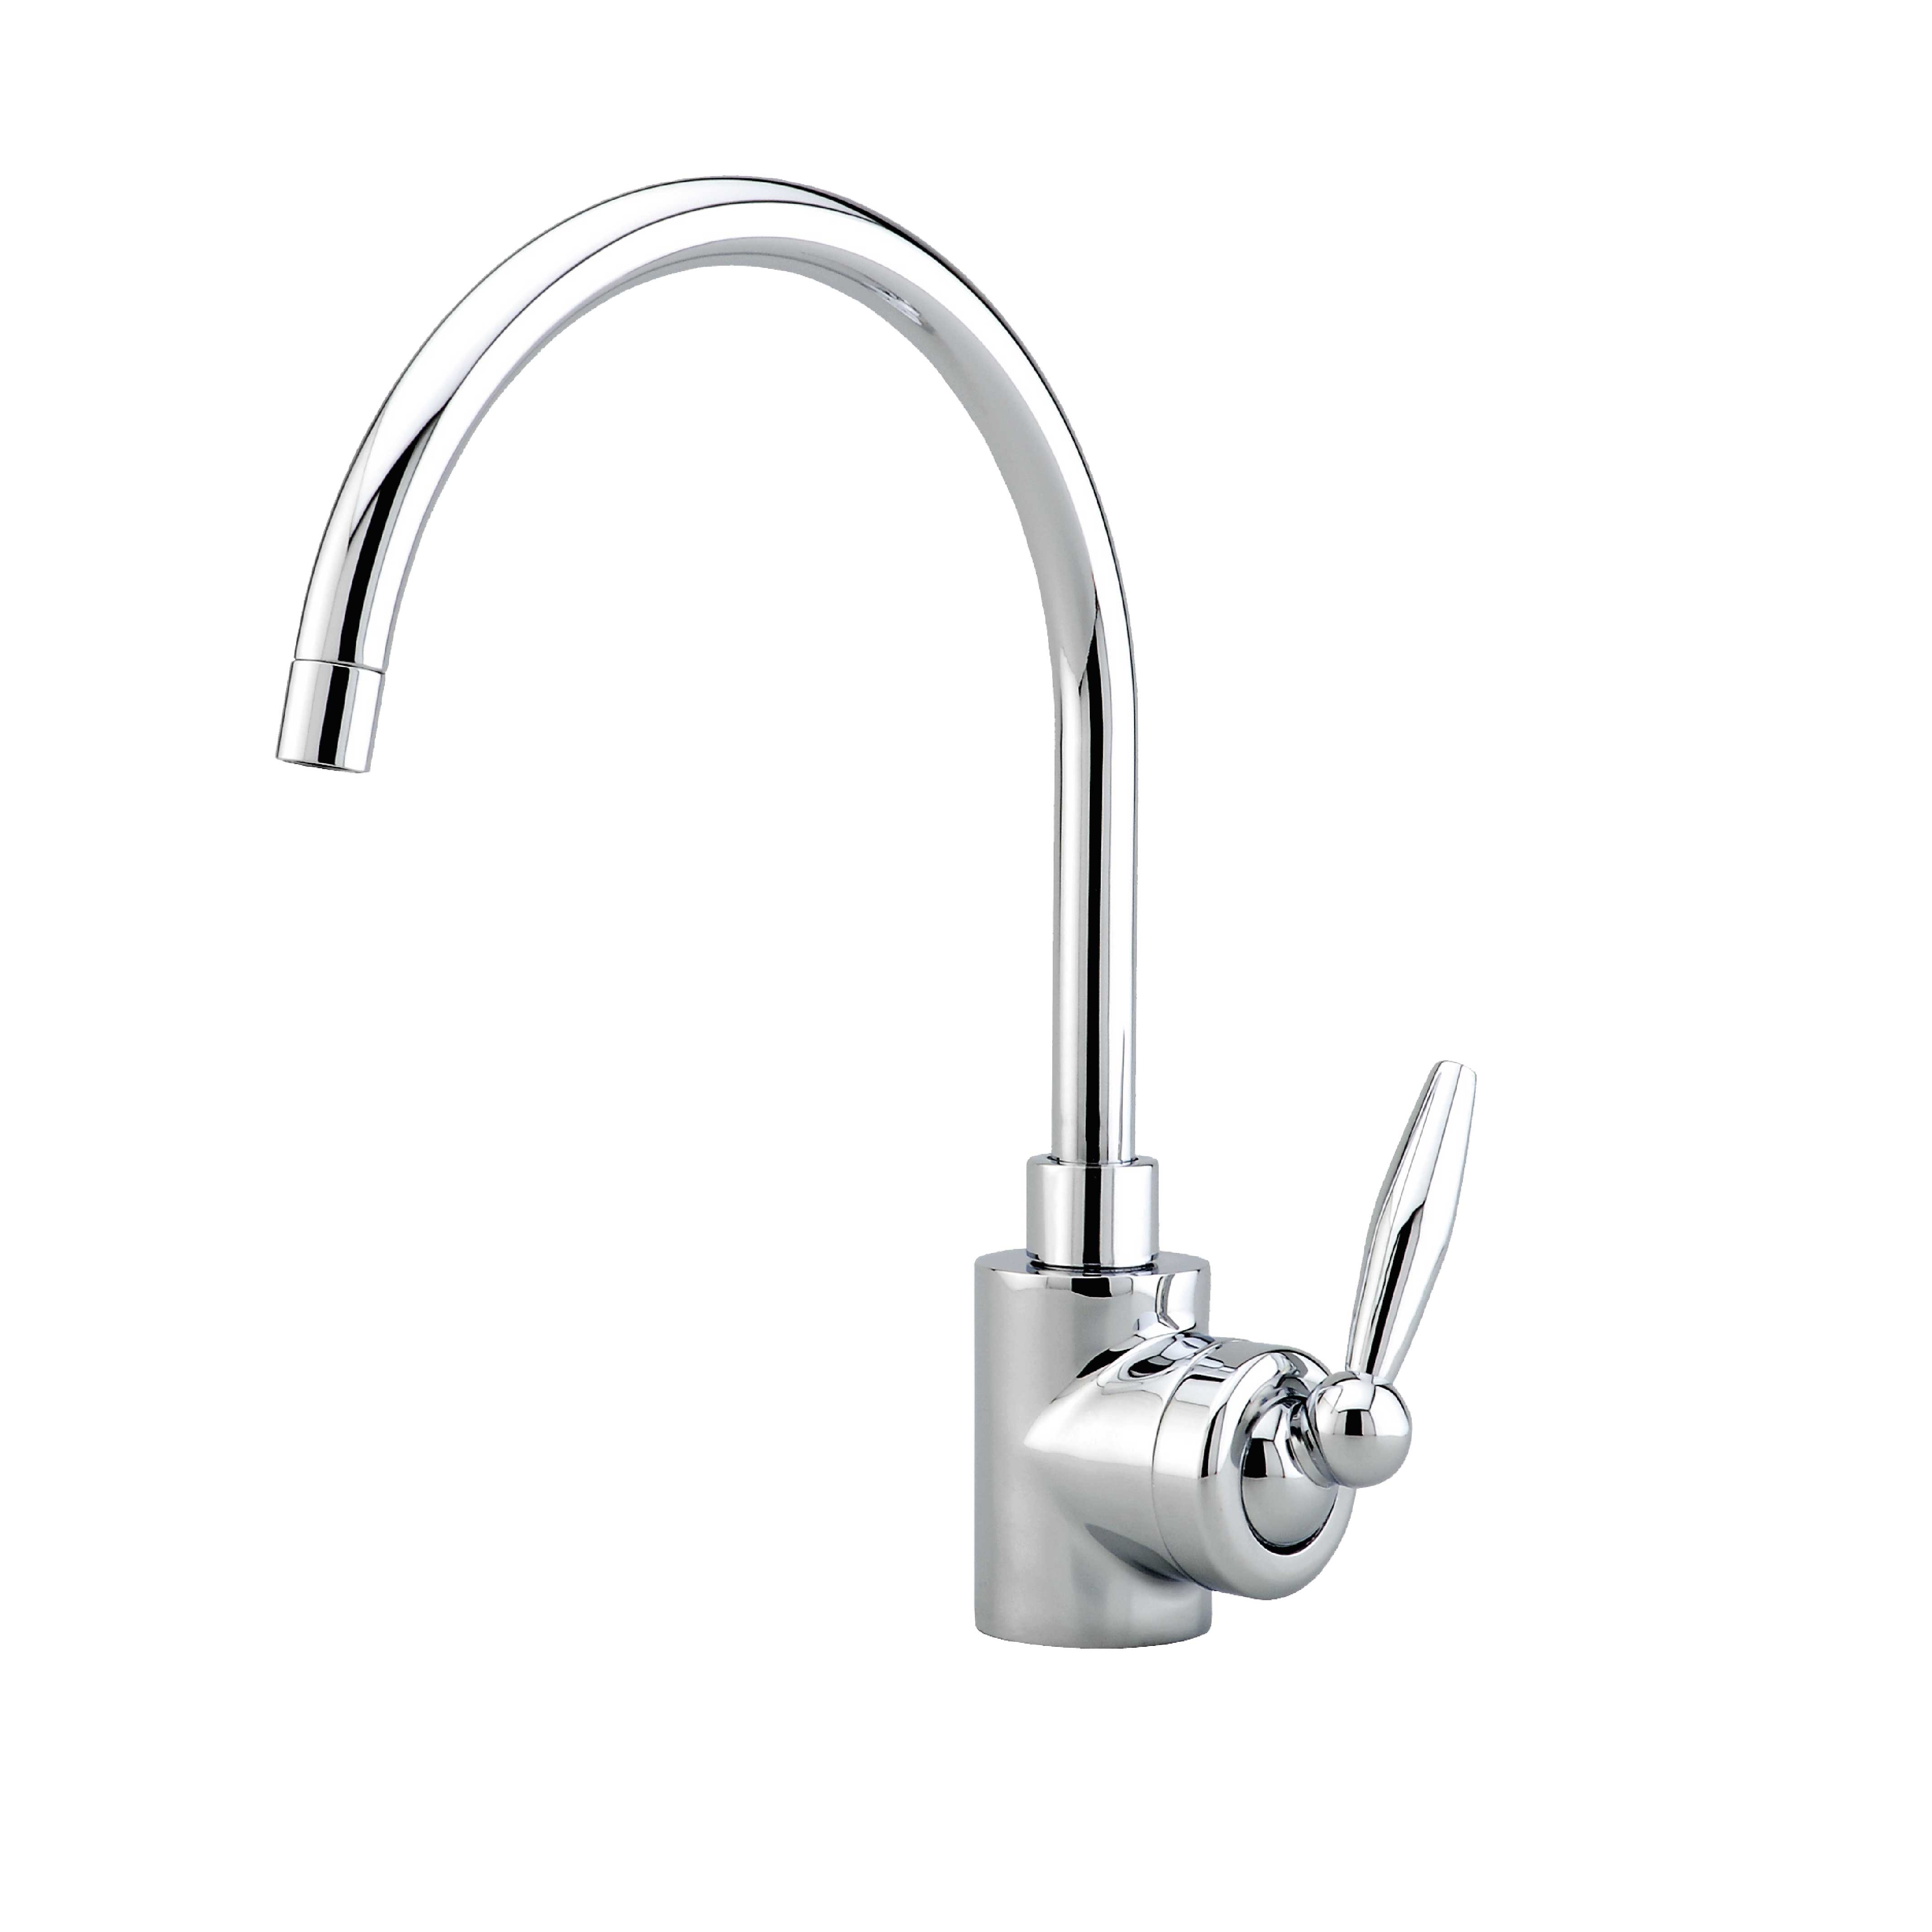 MKC-1BY4 Single-hole lever kitchen mixer